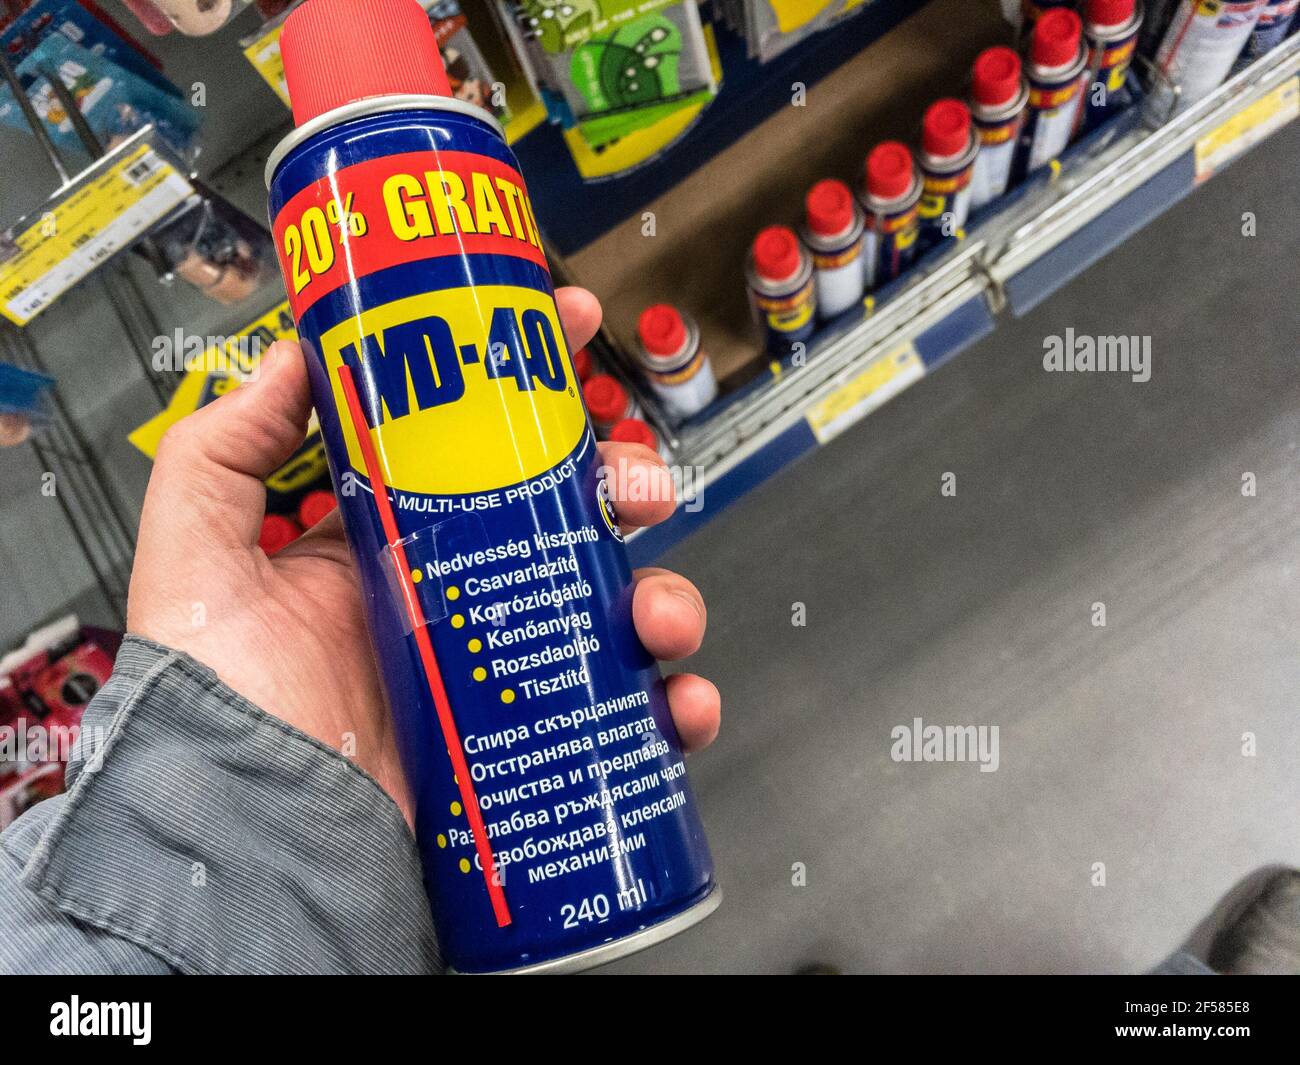 BELGRADE, SERBIA - MARCH 21 2021: WD 40 logo on some of their water displacer sprays for sale in Belgrade. WD-40 is an iconic American brand of chemic Stock Photo